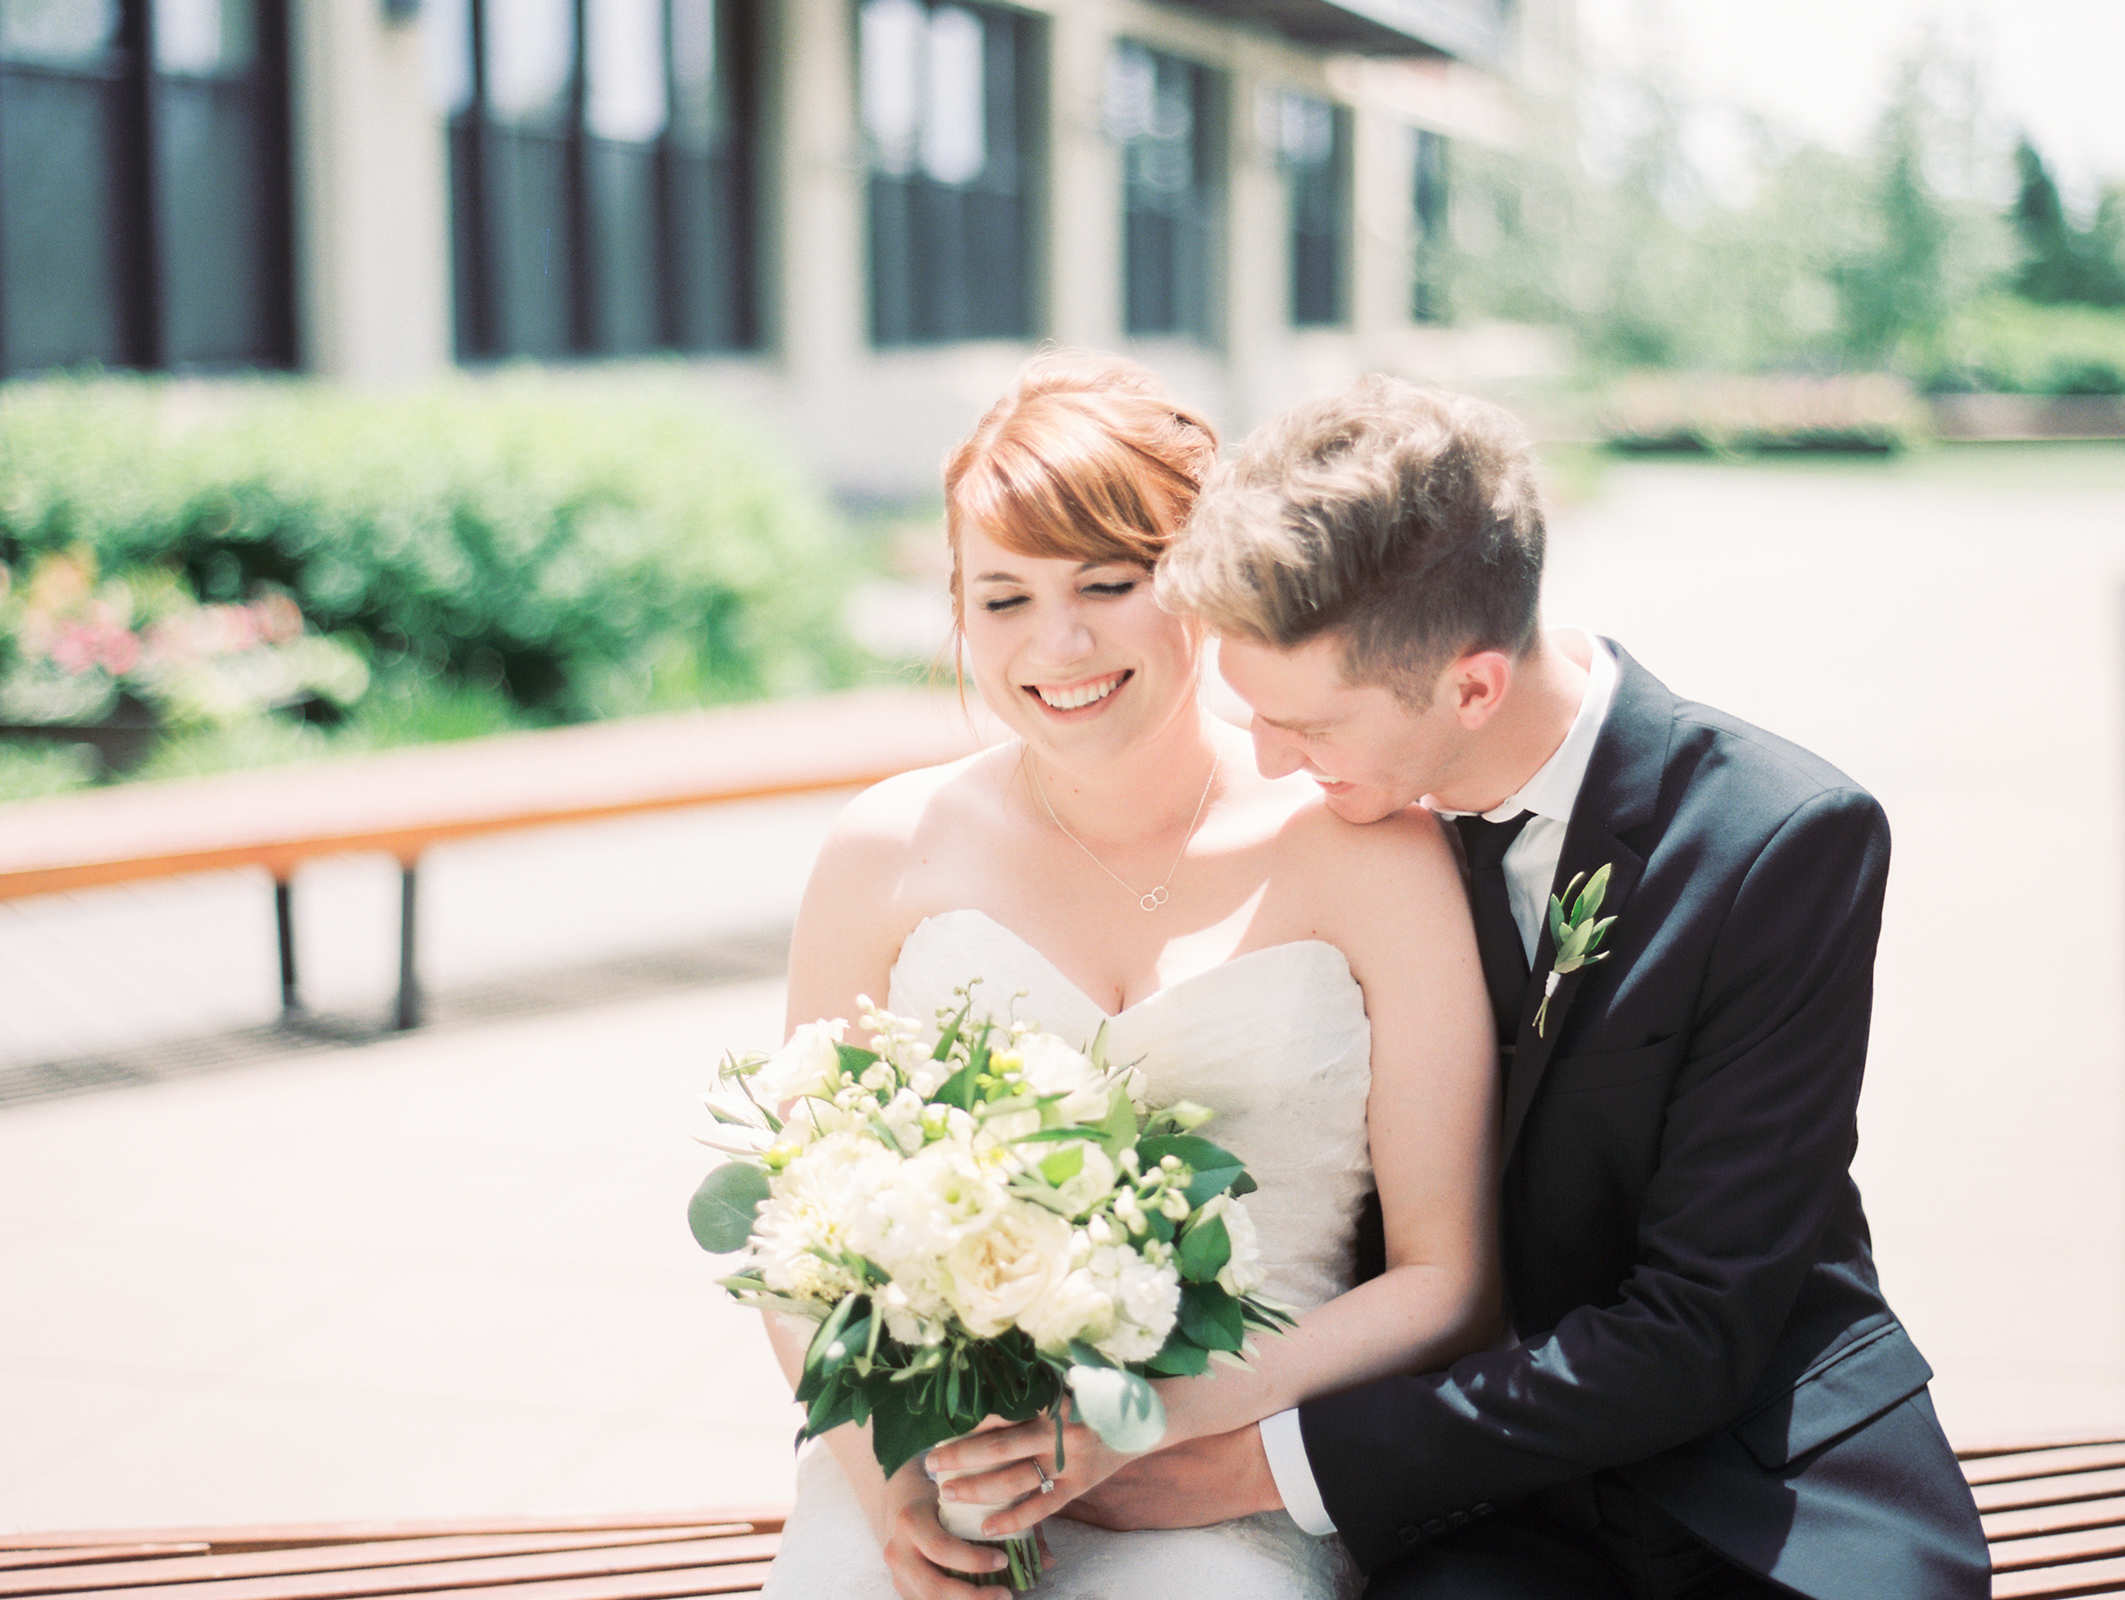 Bride and groom at minimalist and monochromatic Greenhouse Loft wedding with eucalyptus, white dahlias, garden roses.